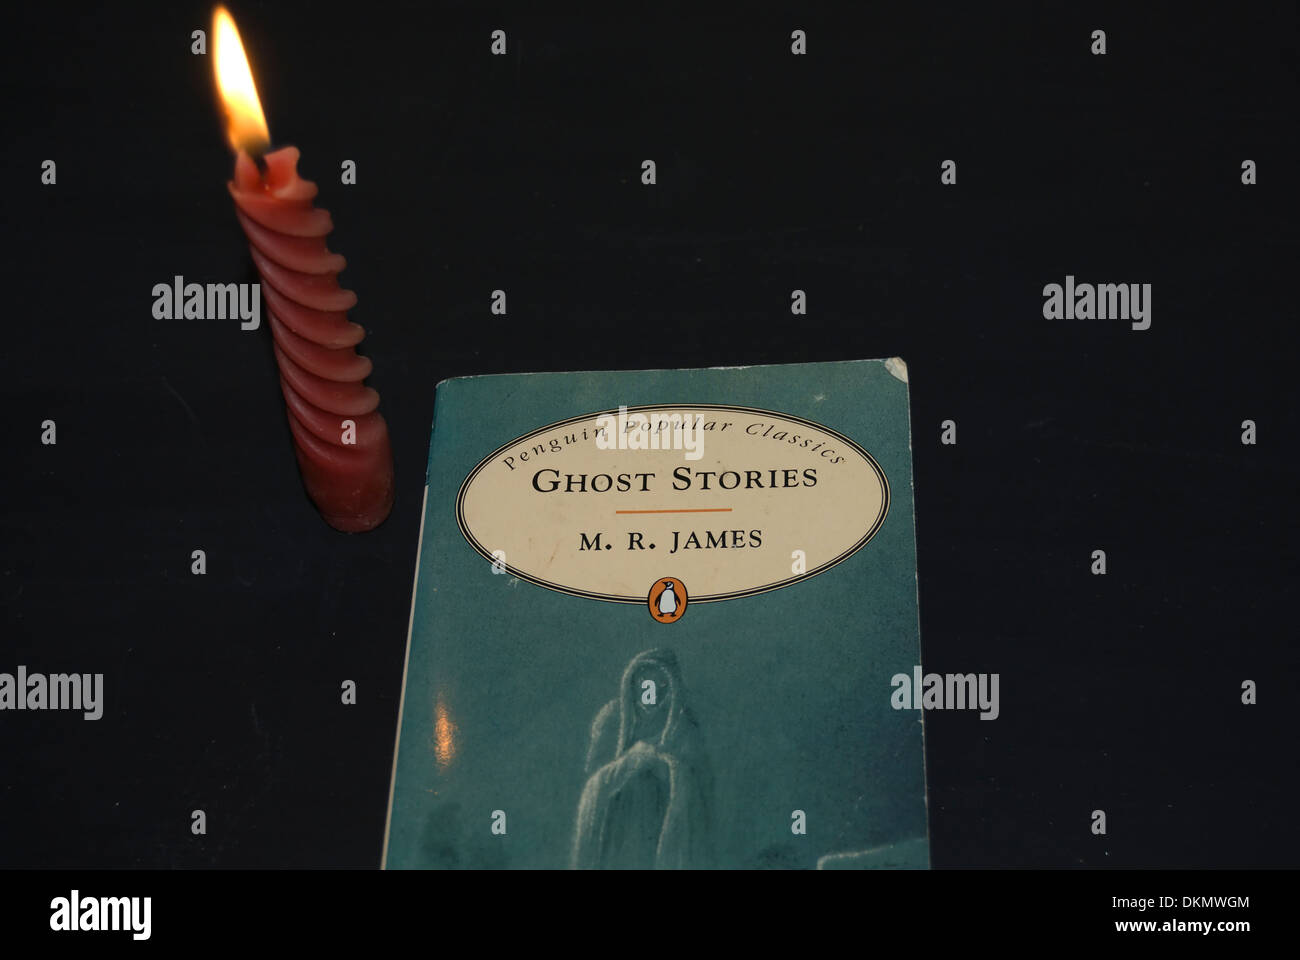 book of ghost stories by author m.r.james, with candle Stock Photo